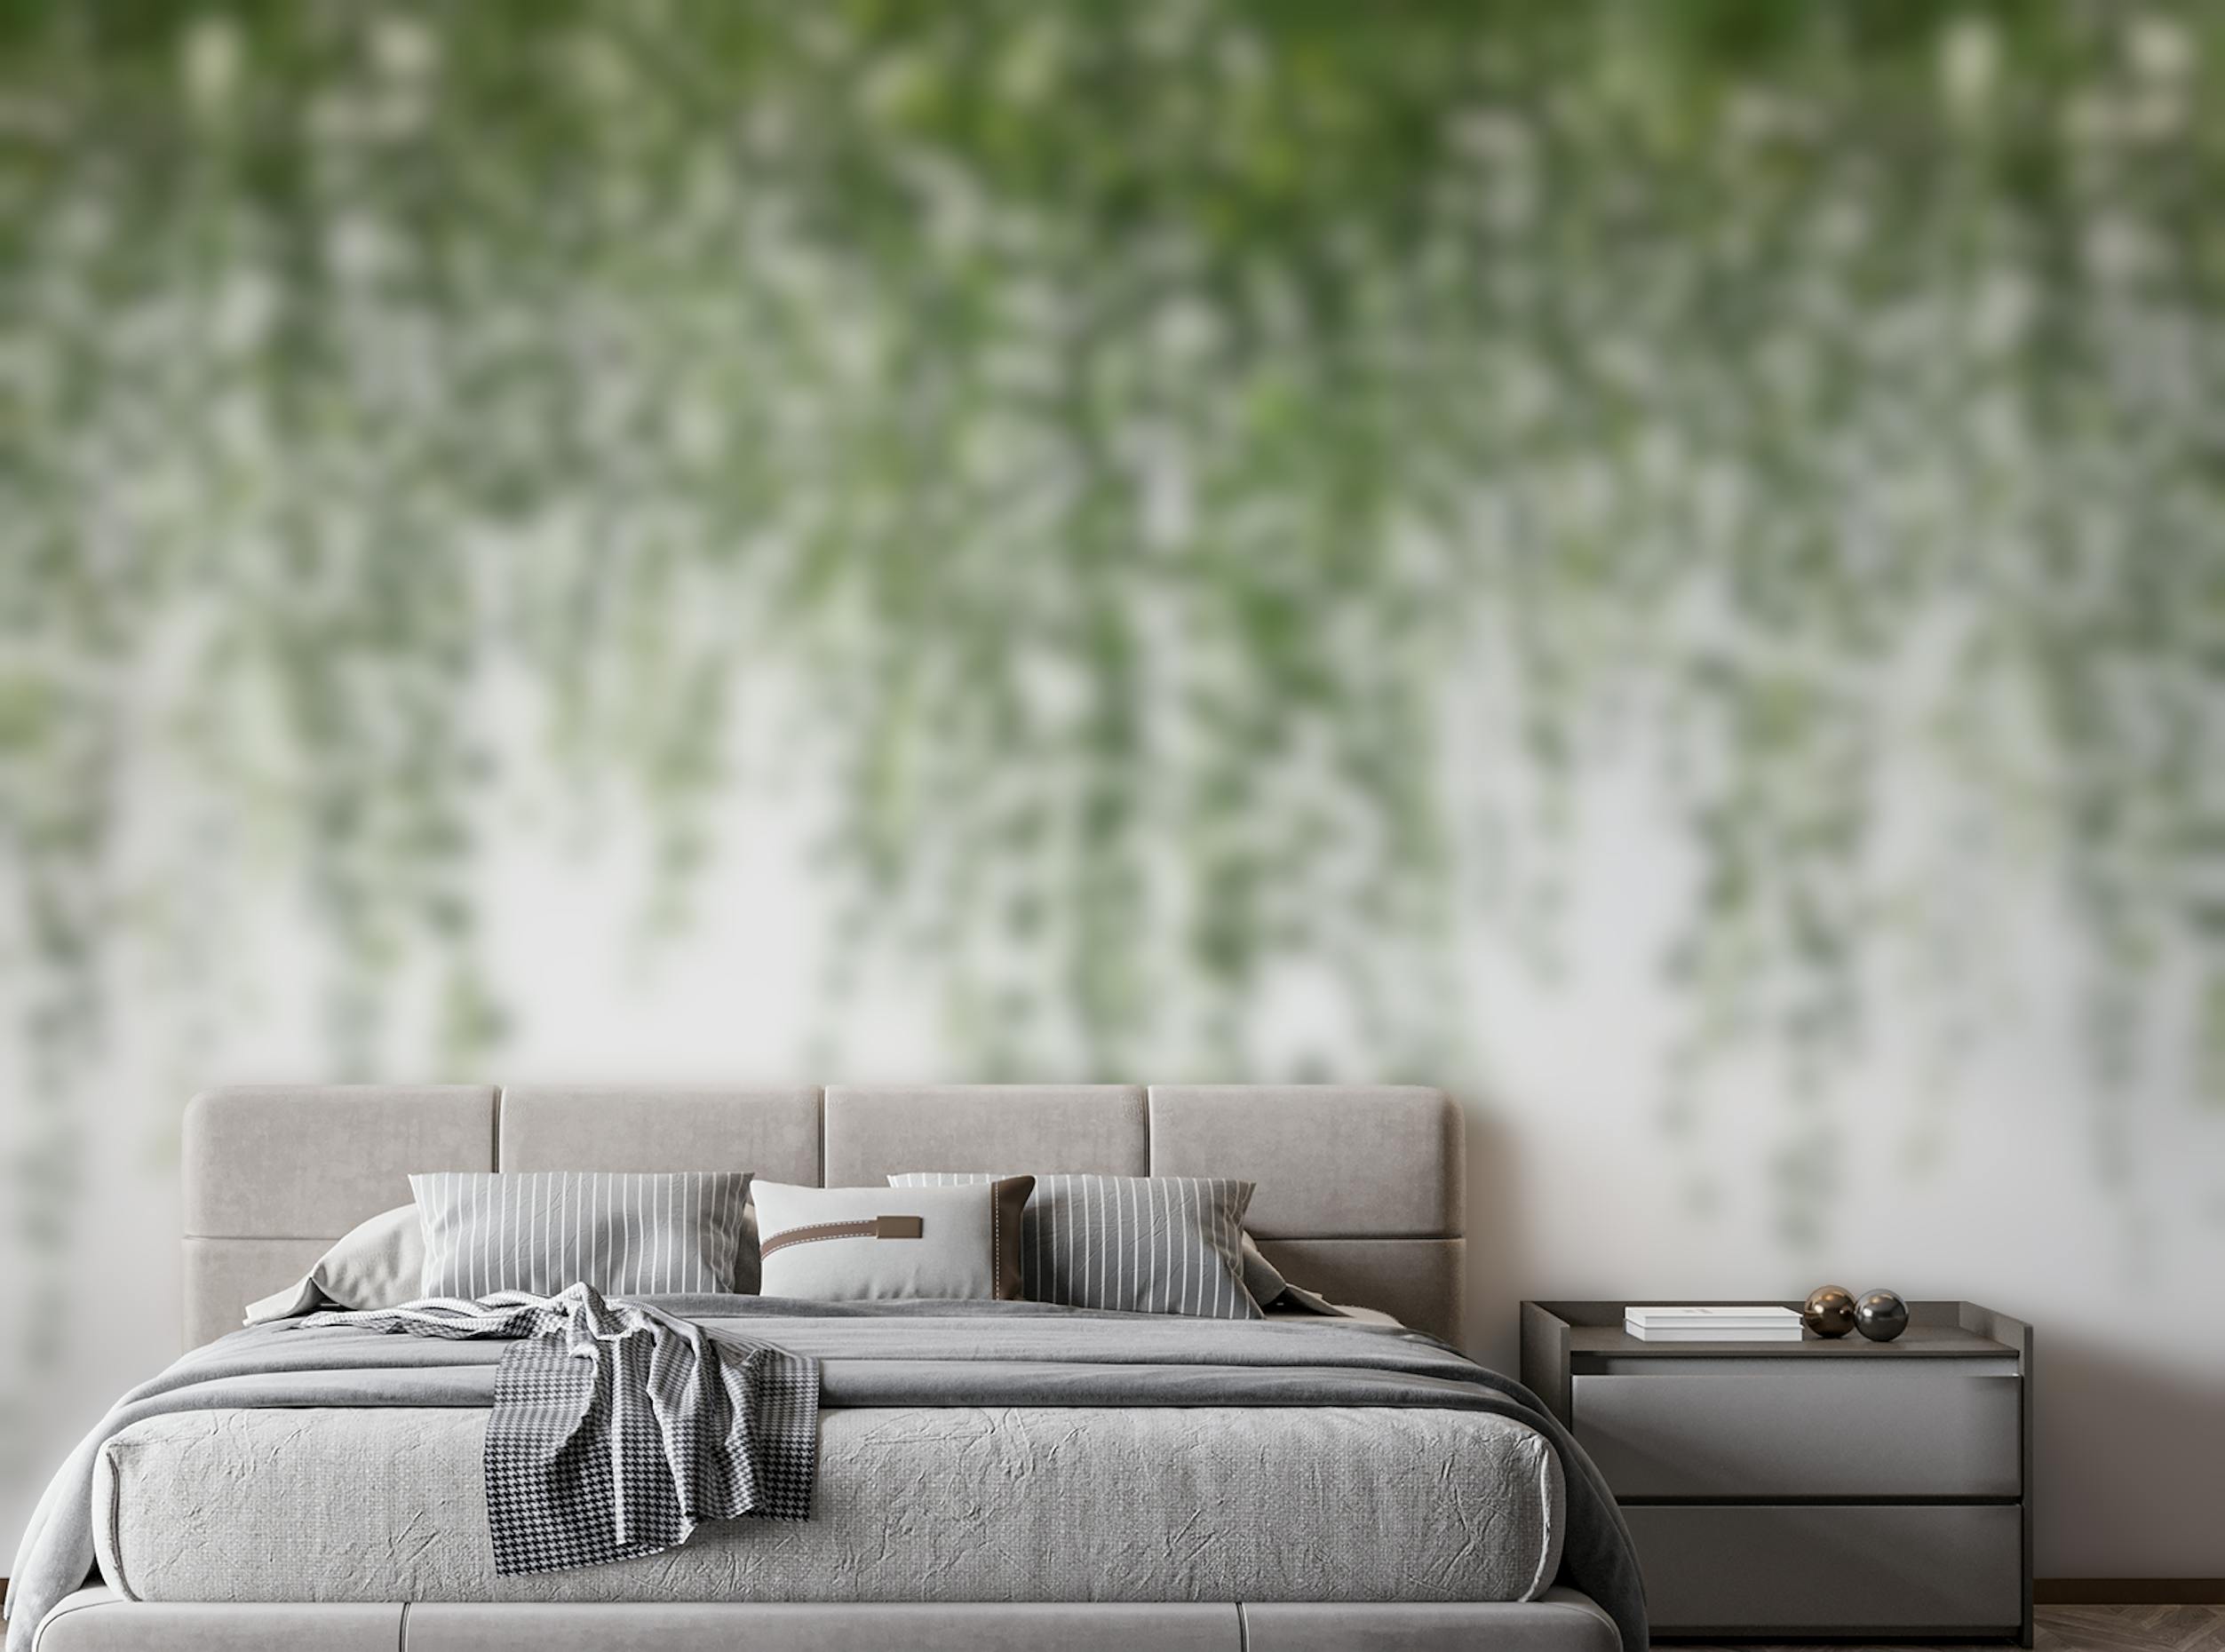 Peel and Stick Green Hanging Ivy Leaves Wallpaper Mural